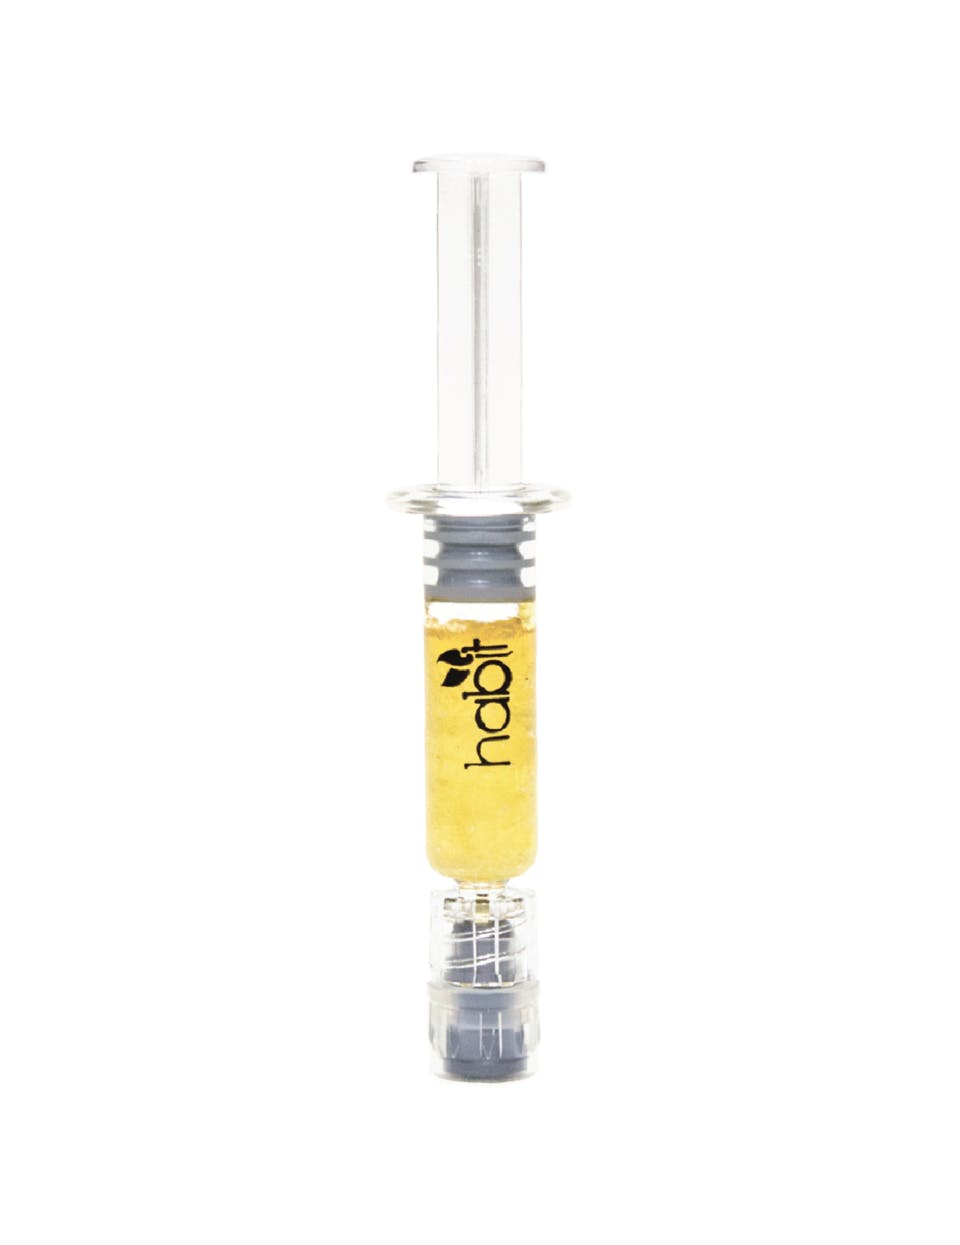 concentrate-1g-critical-kush-cbd-live-resin-by-habit